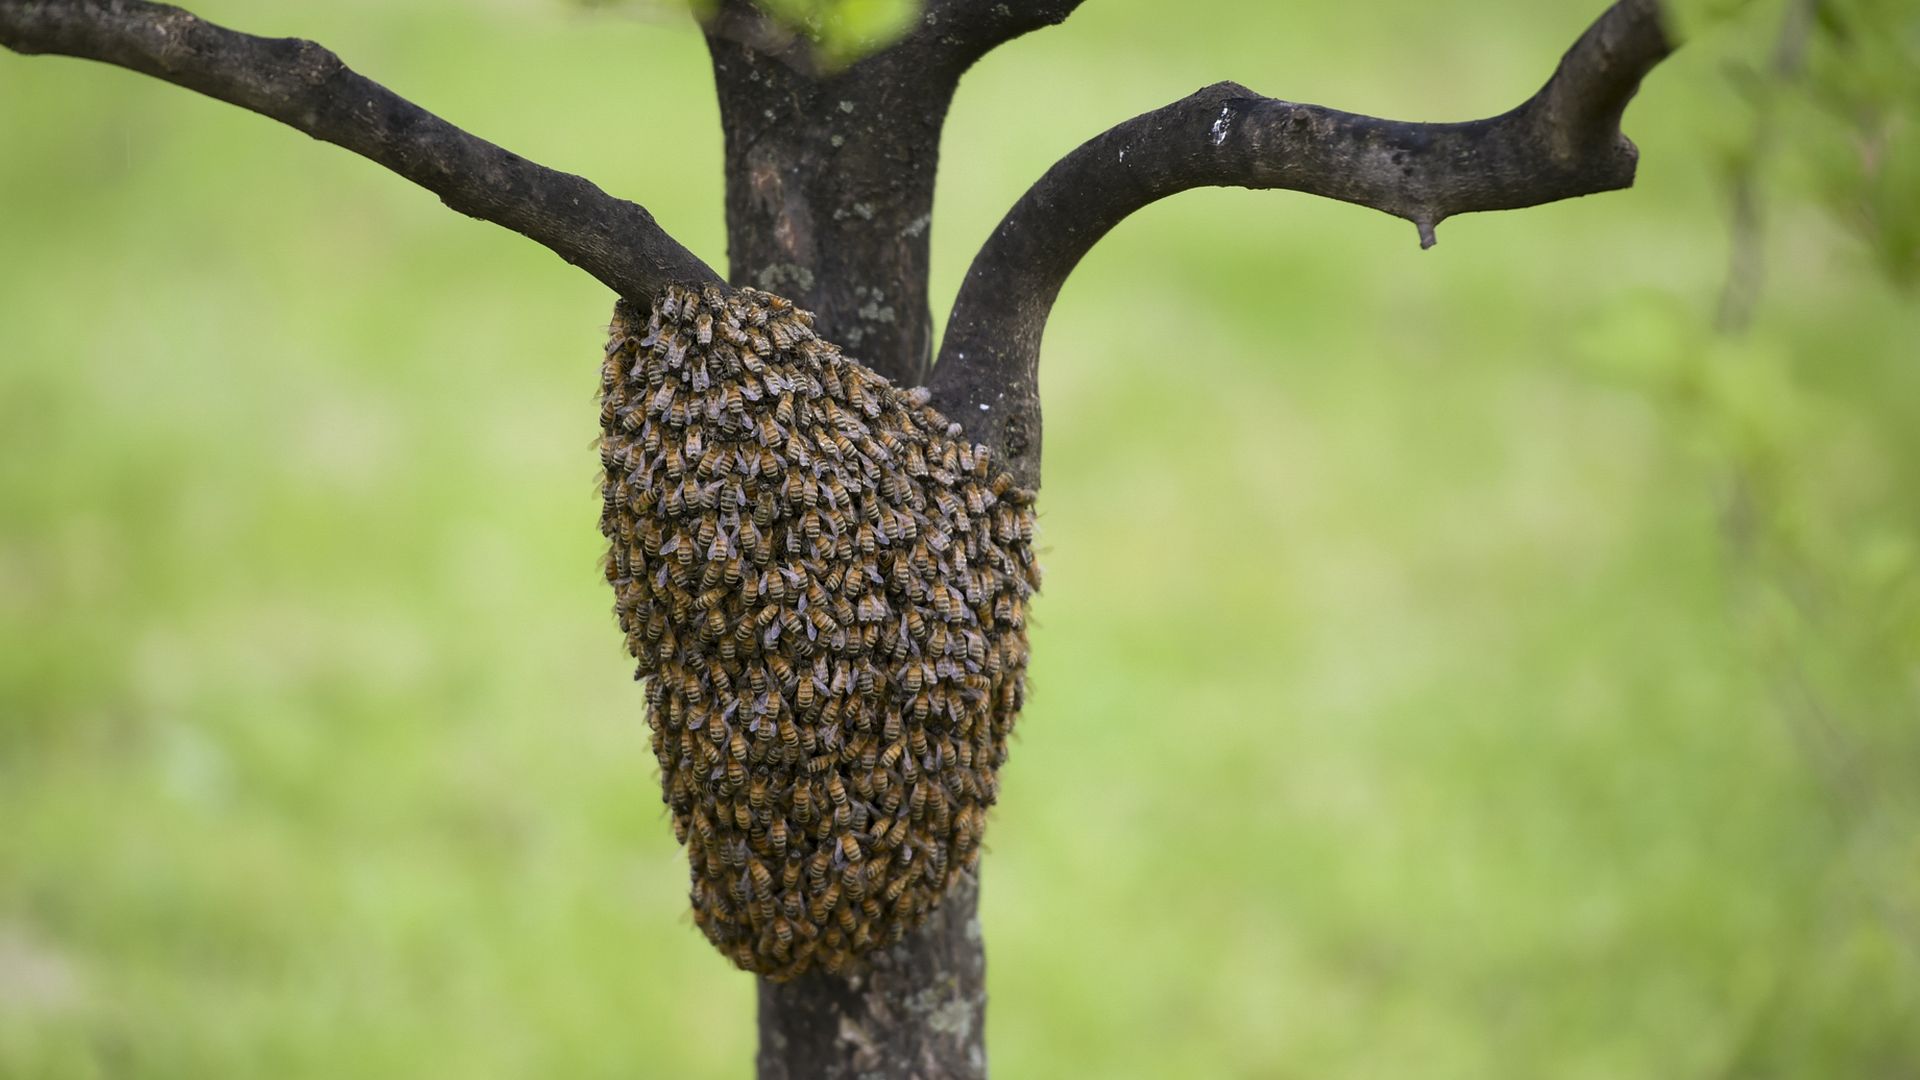 In this image, a cluster of bees are on a tree